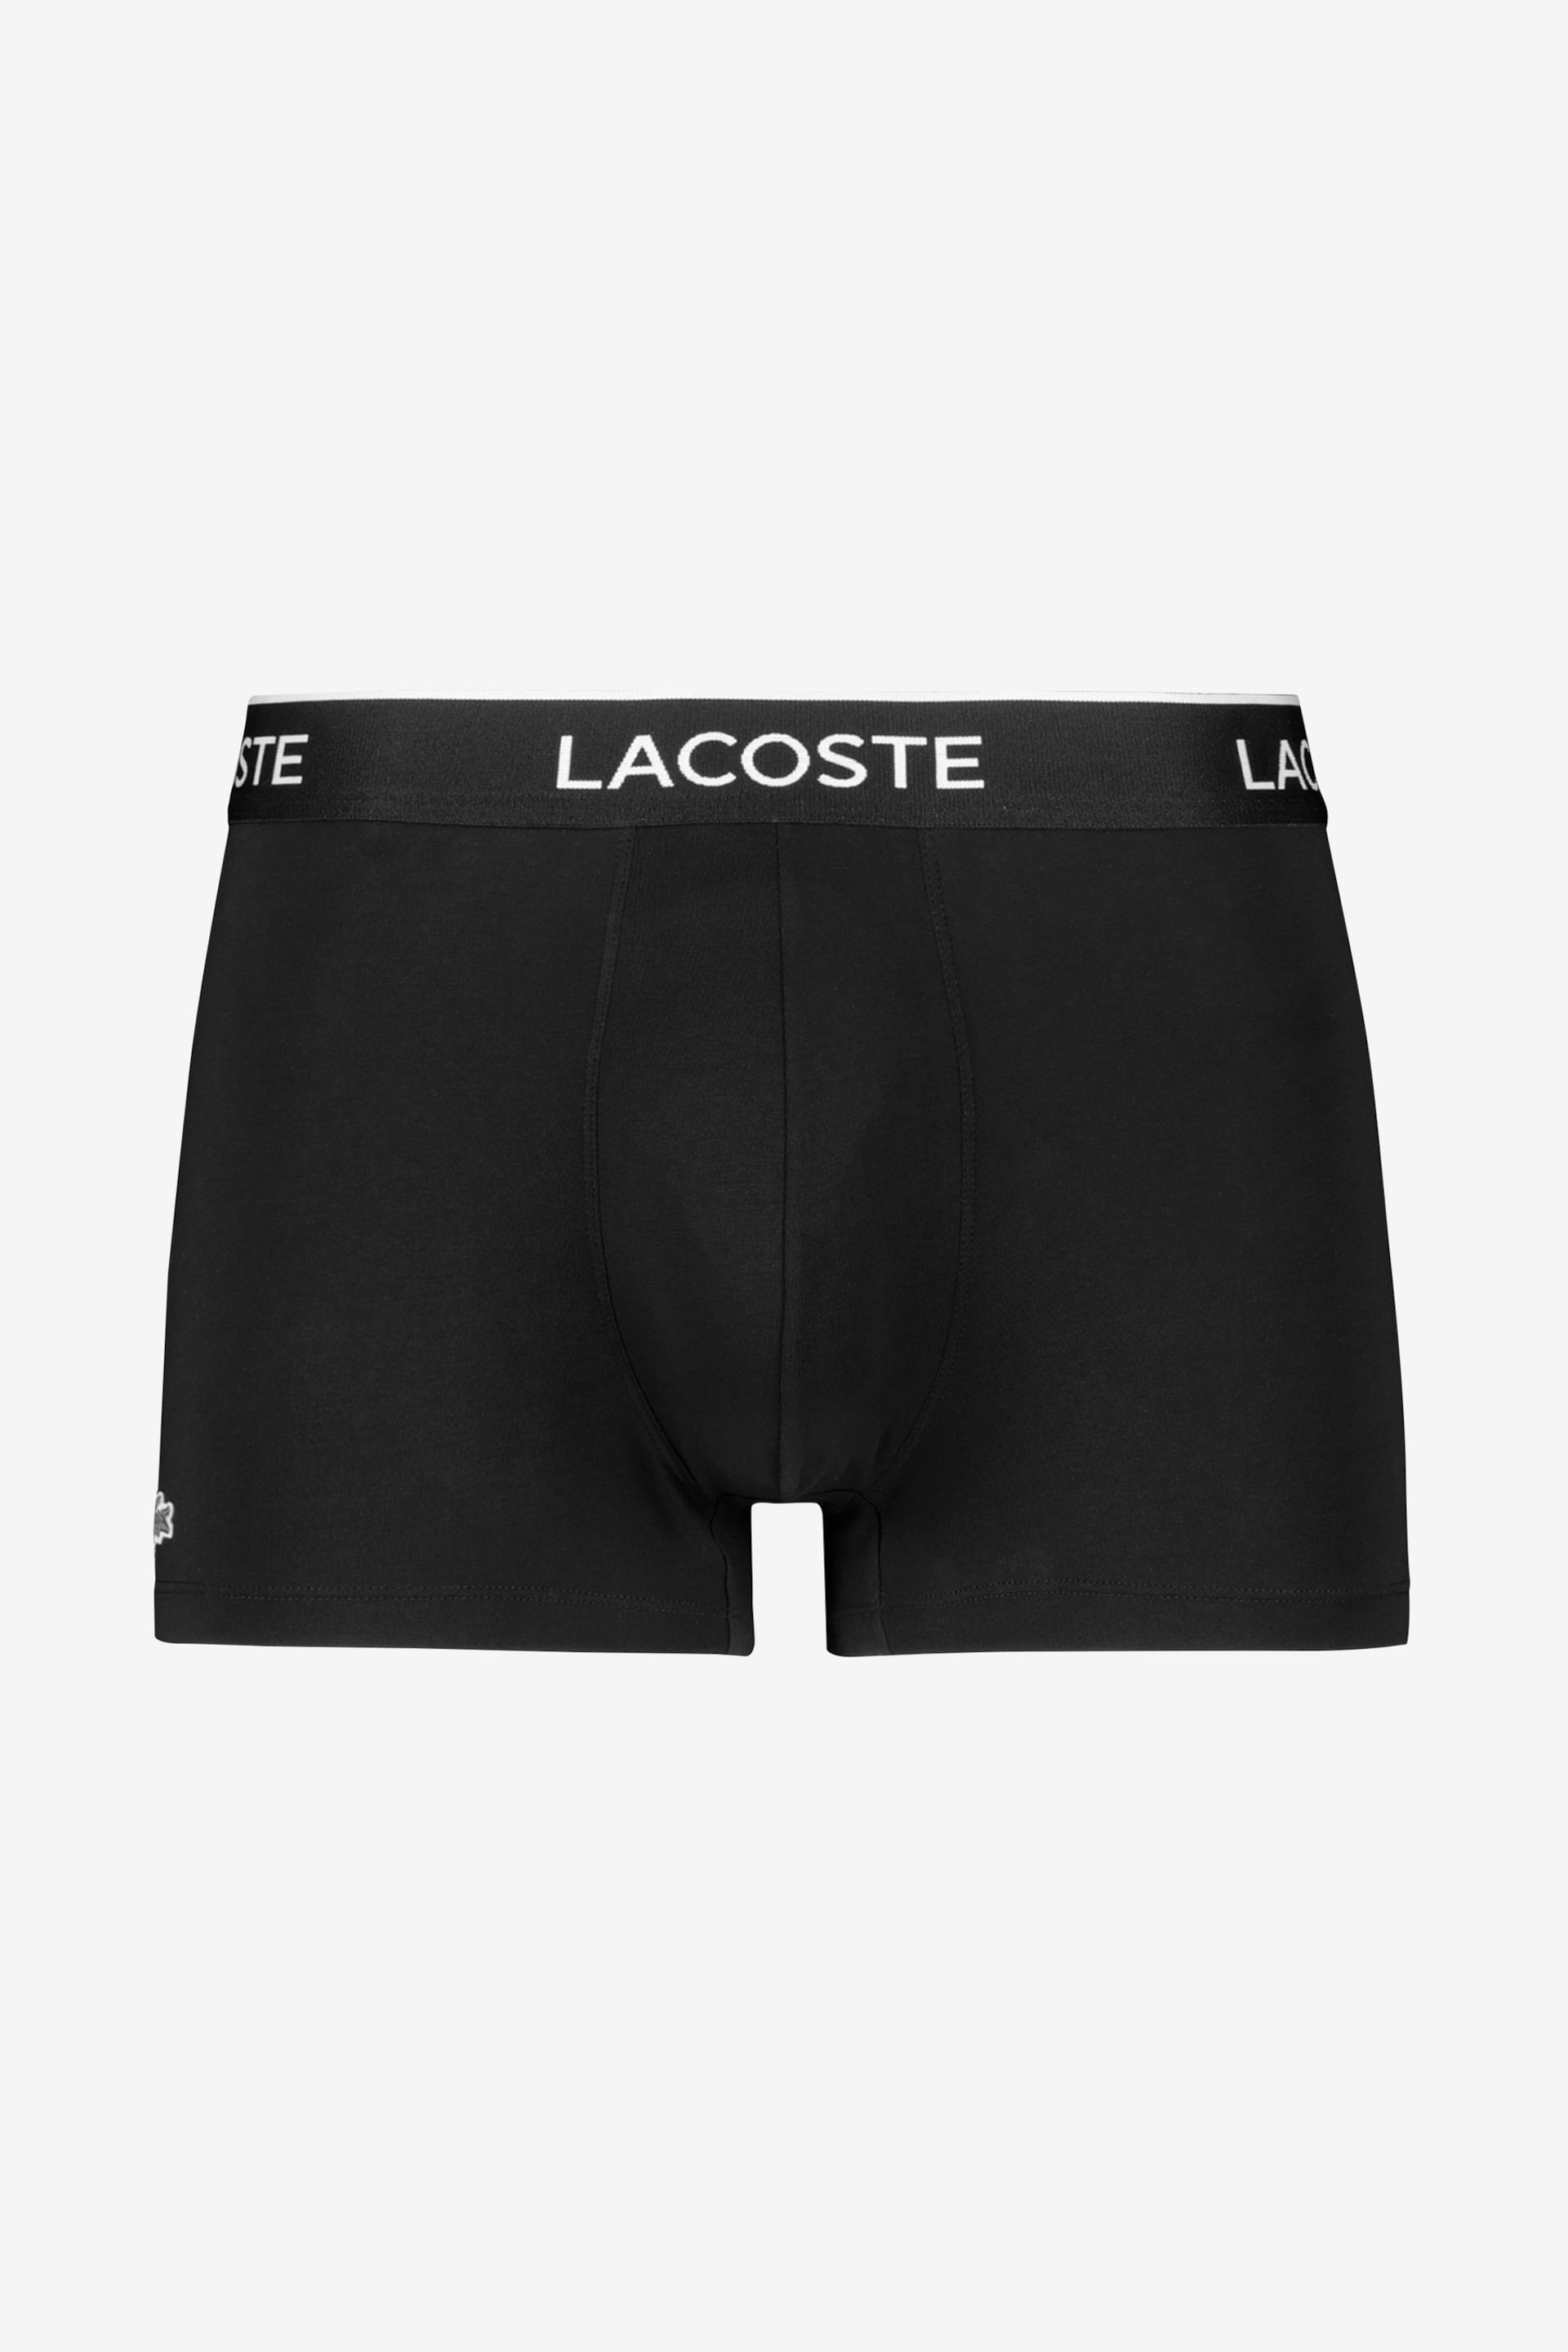 Lacoste Black Boxers 3 Packs - Image 2 of 2